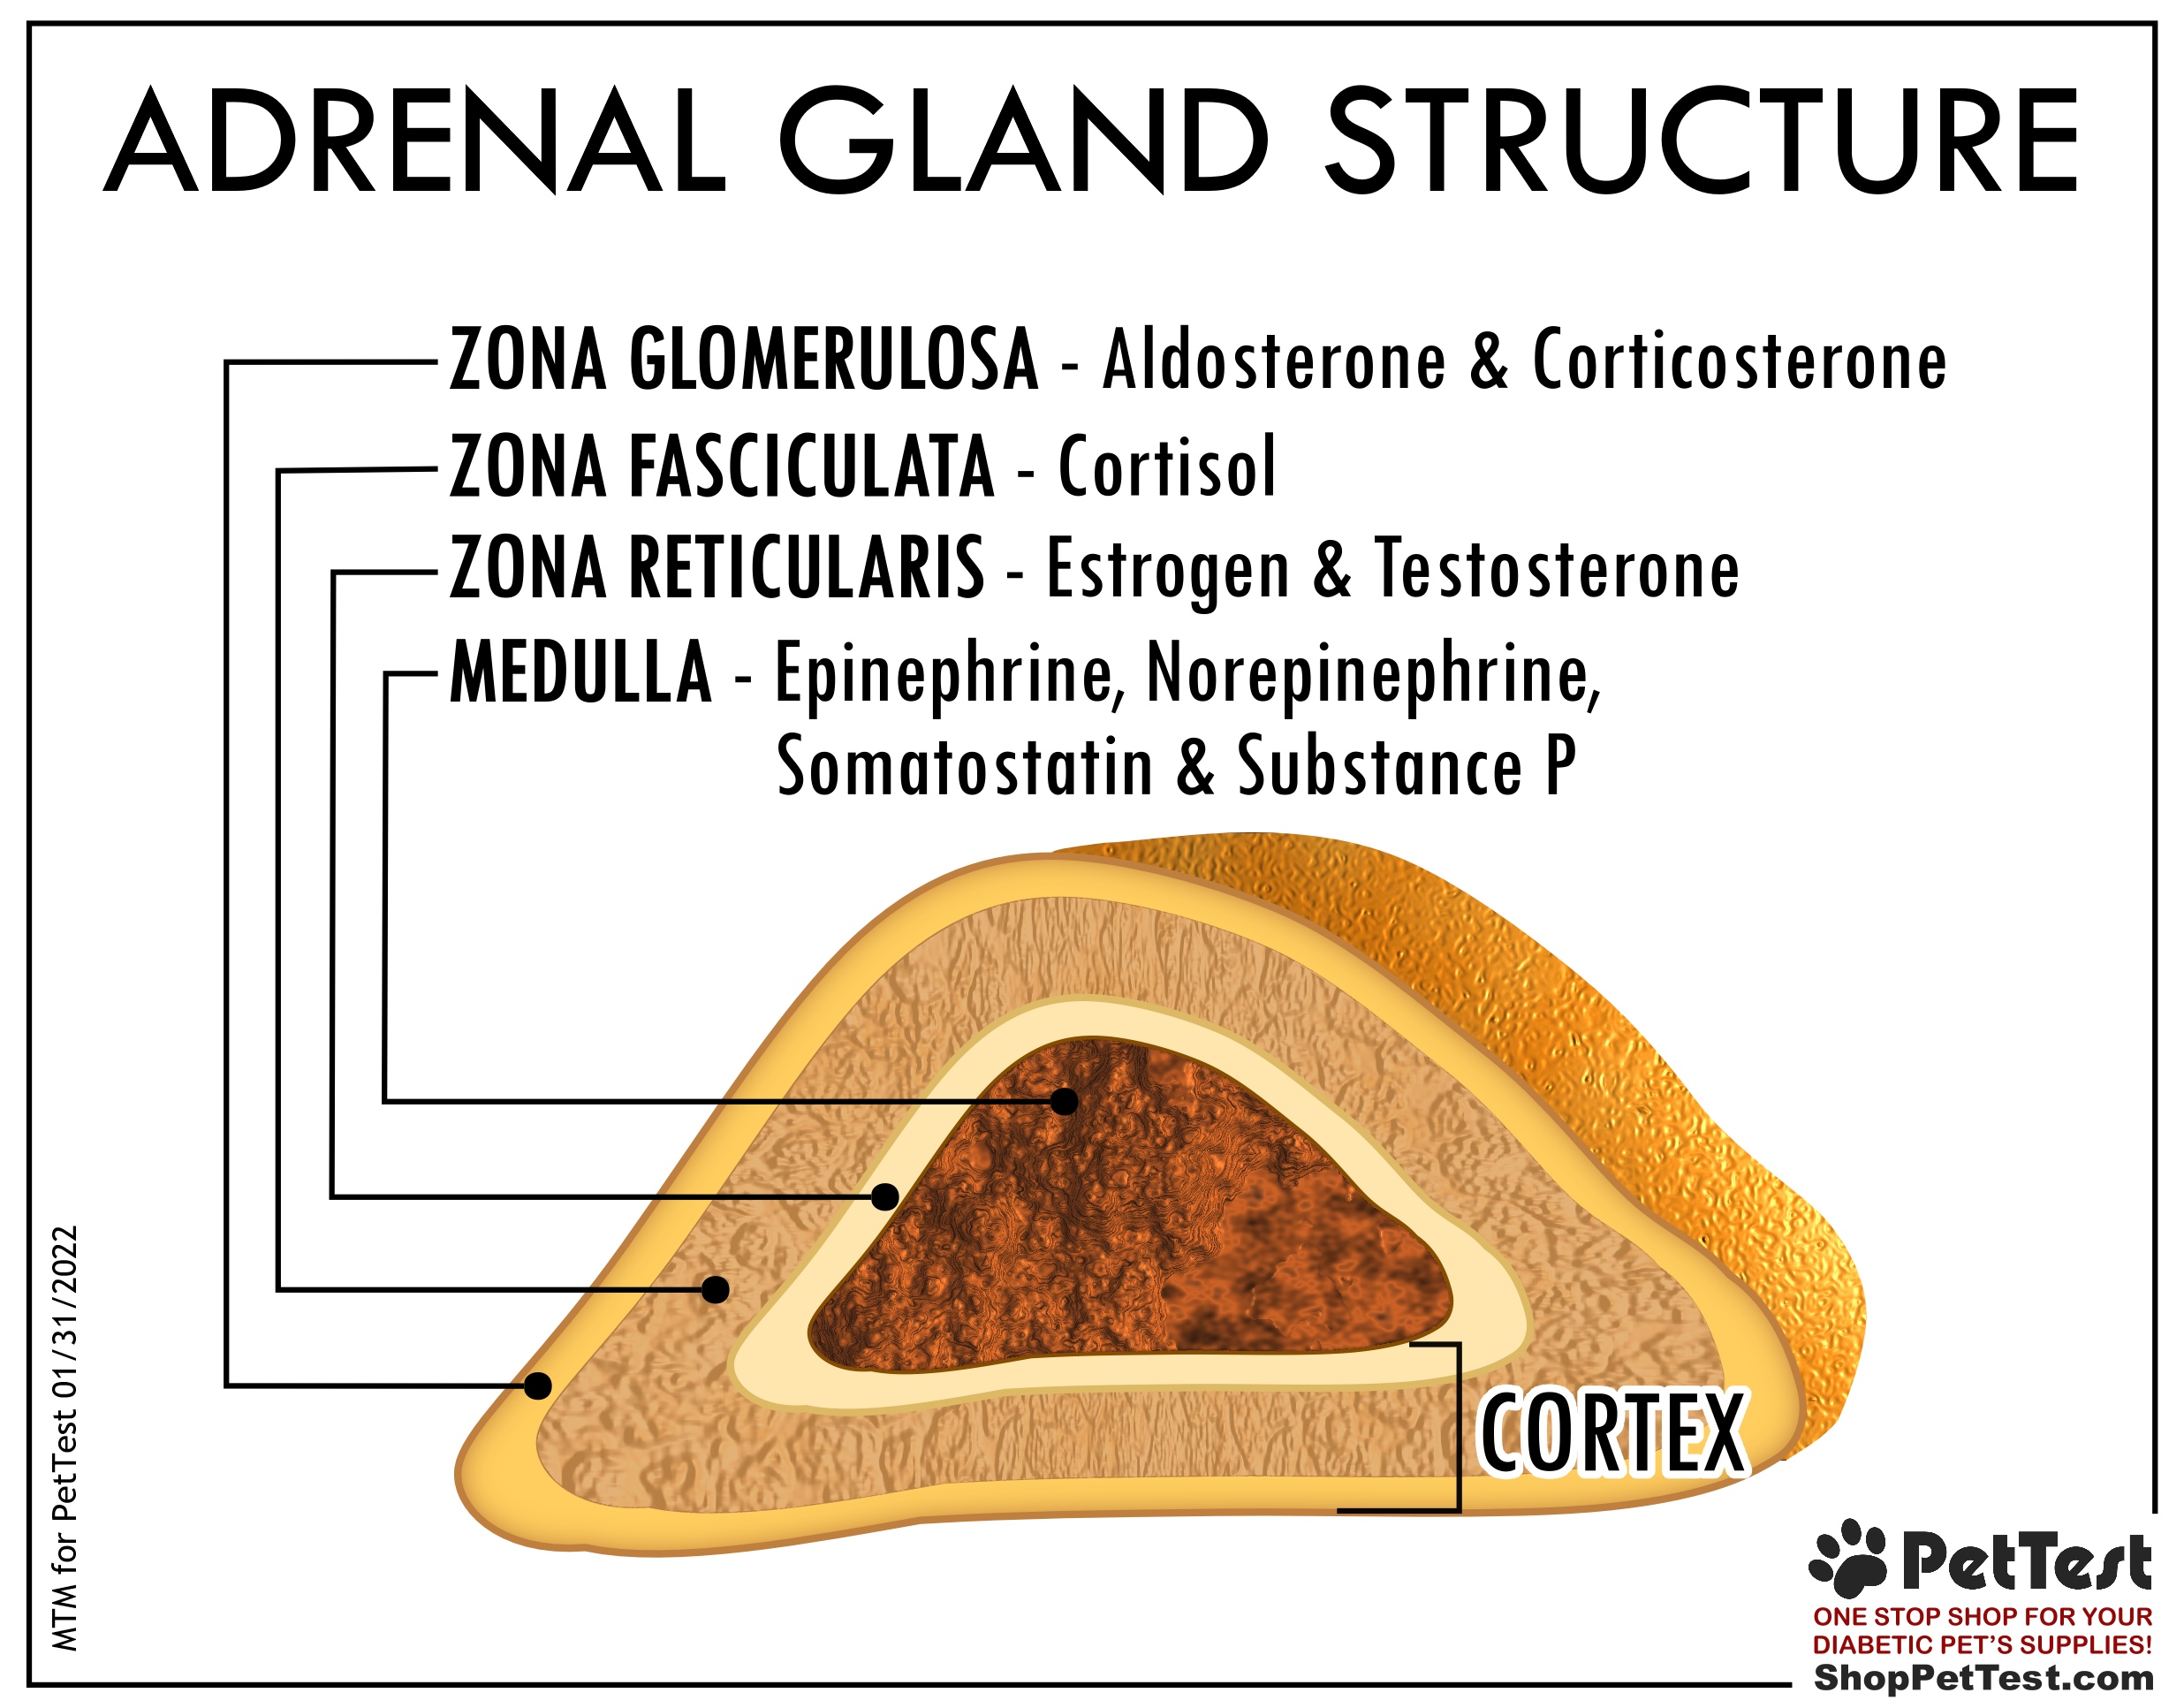 Adrenal Gland Structure for AD Blog mtm